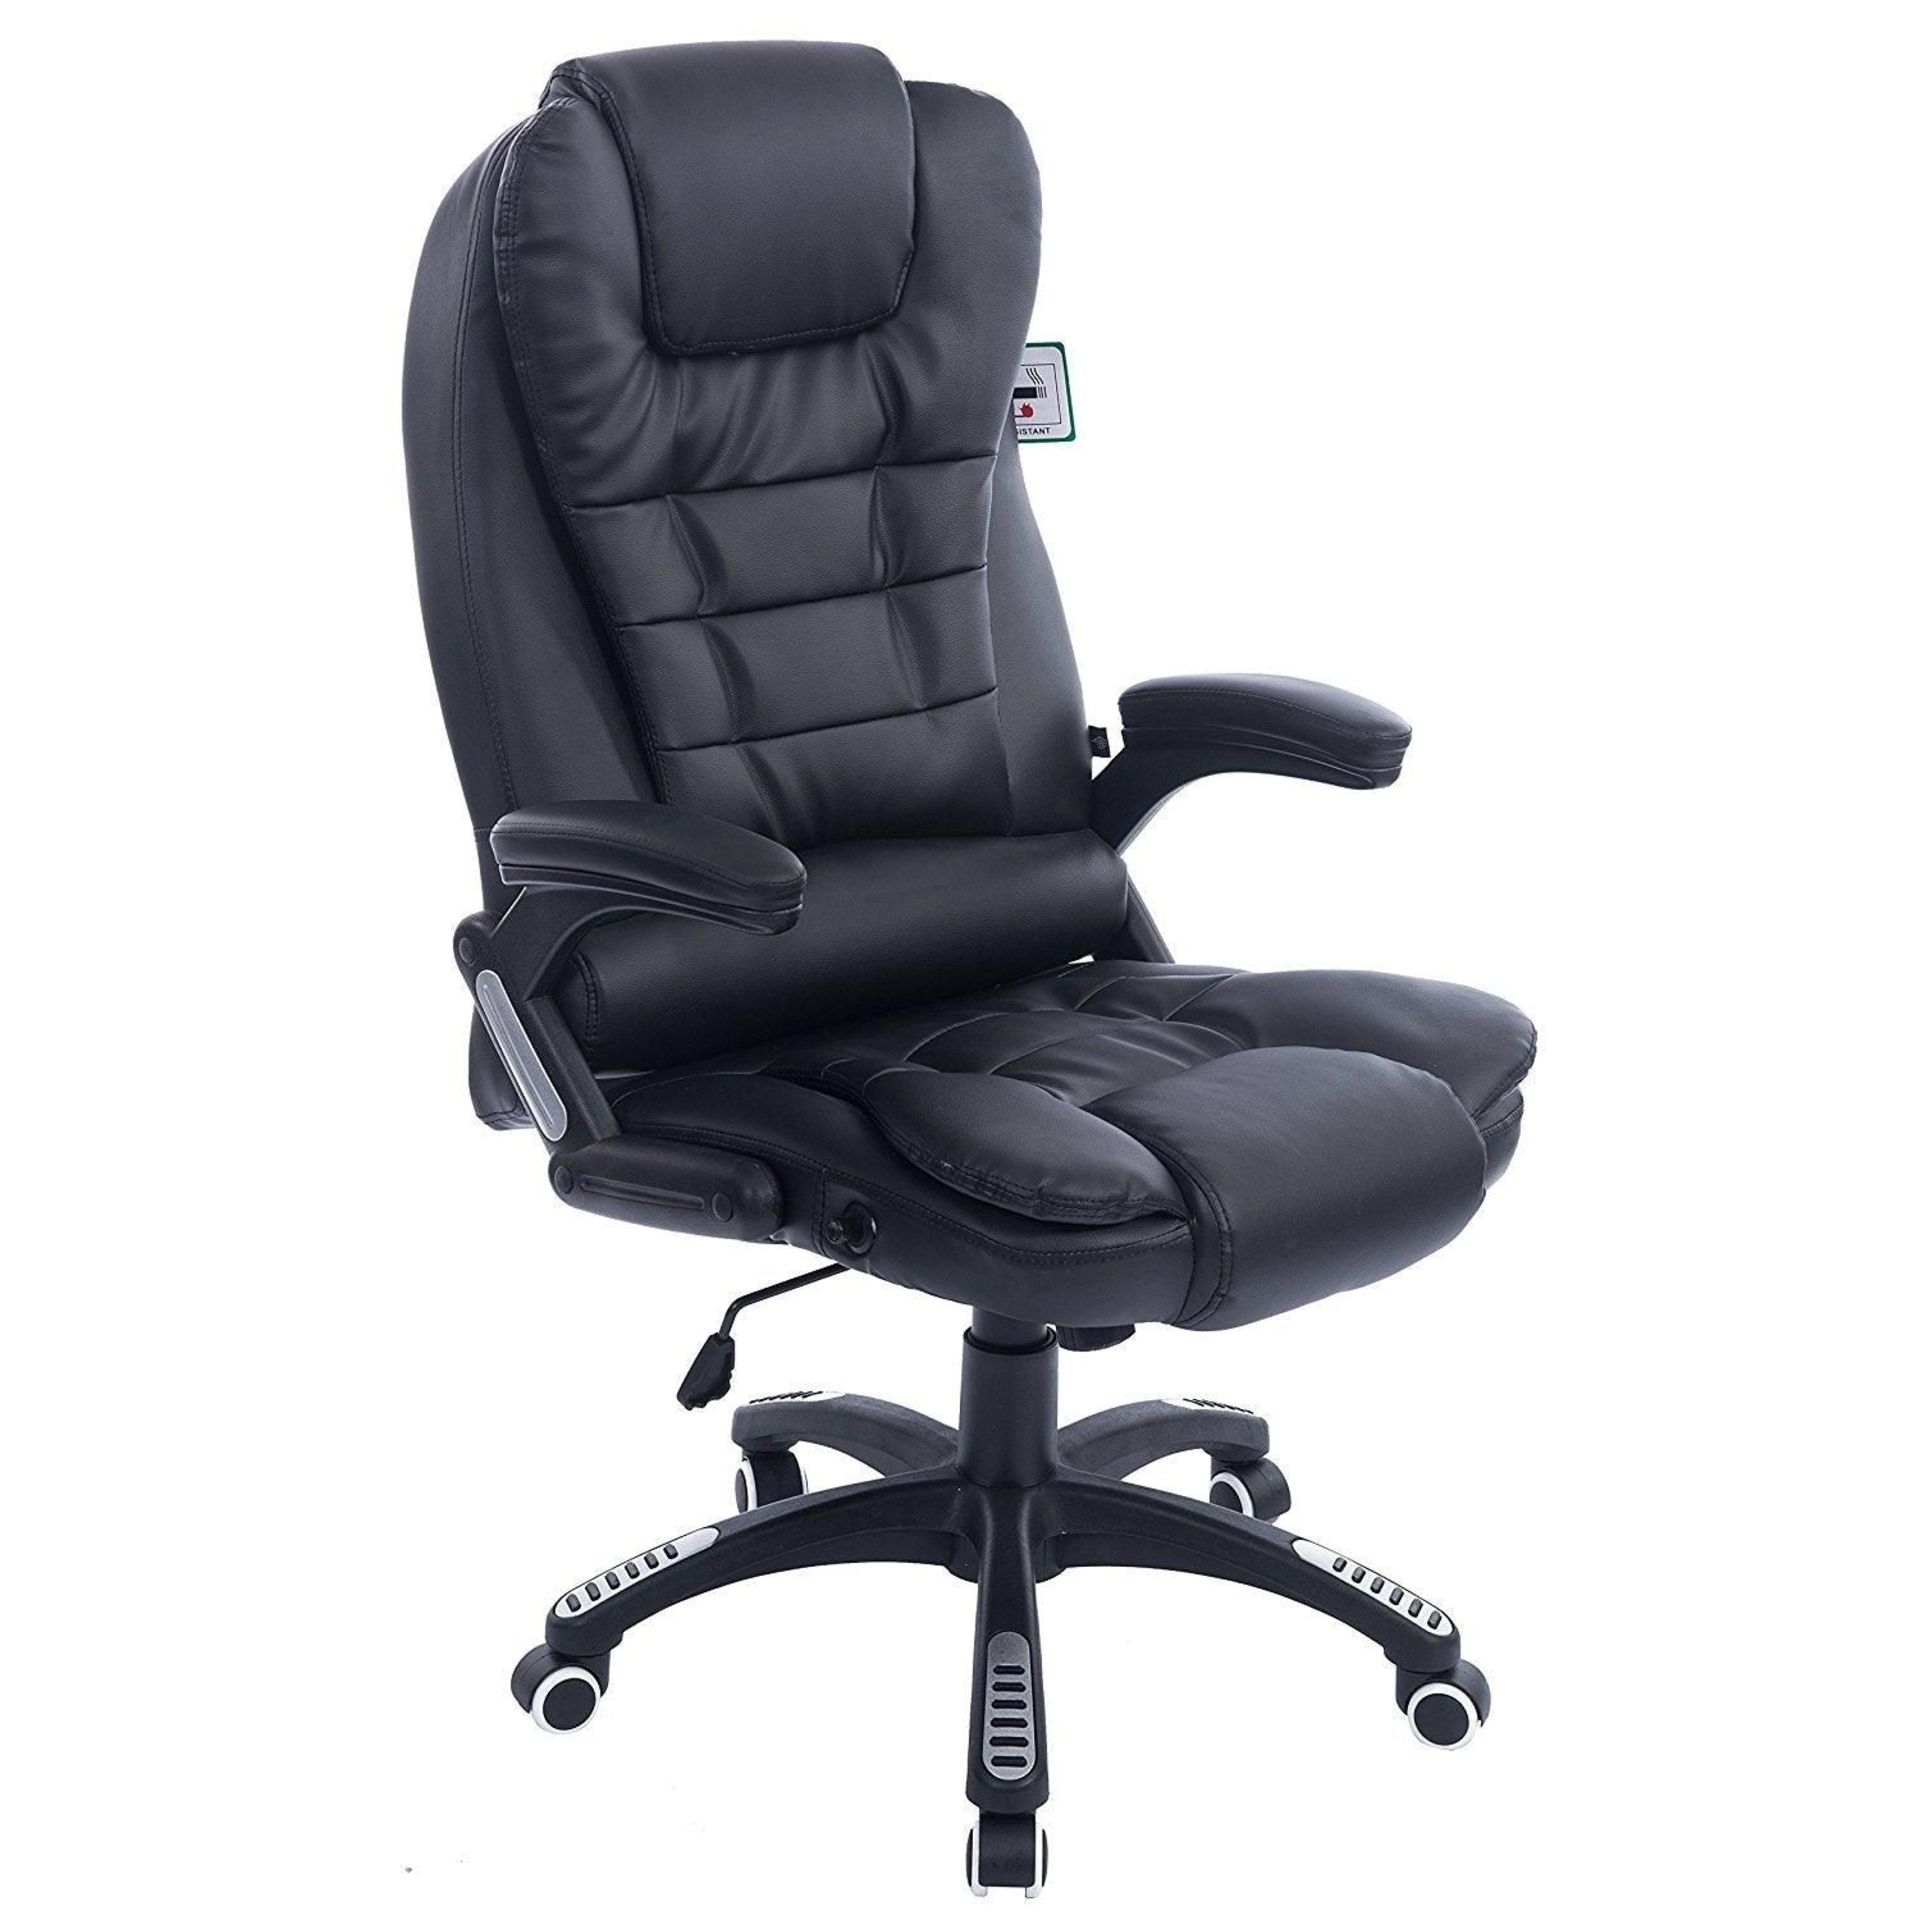 Executive Recline High Back Extra Padded Office Chair, MO17 Black. - SR3. RRP £149.99. Chair back